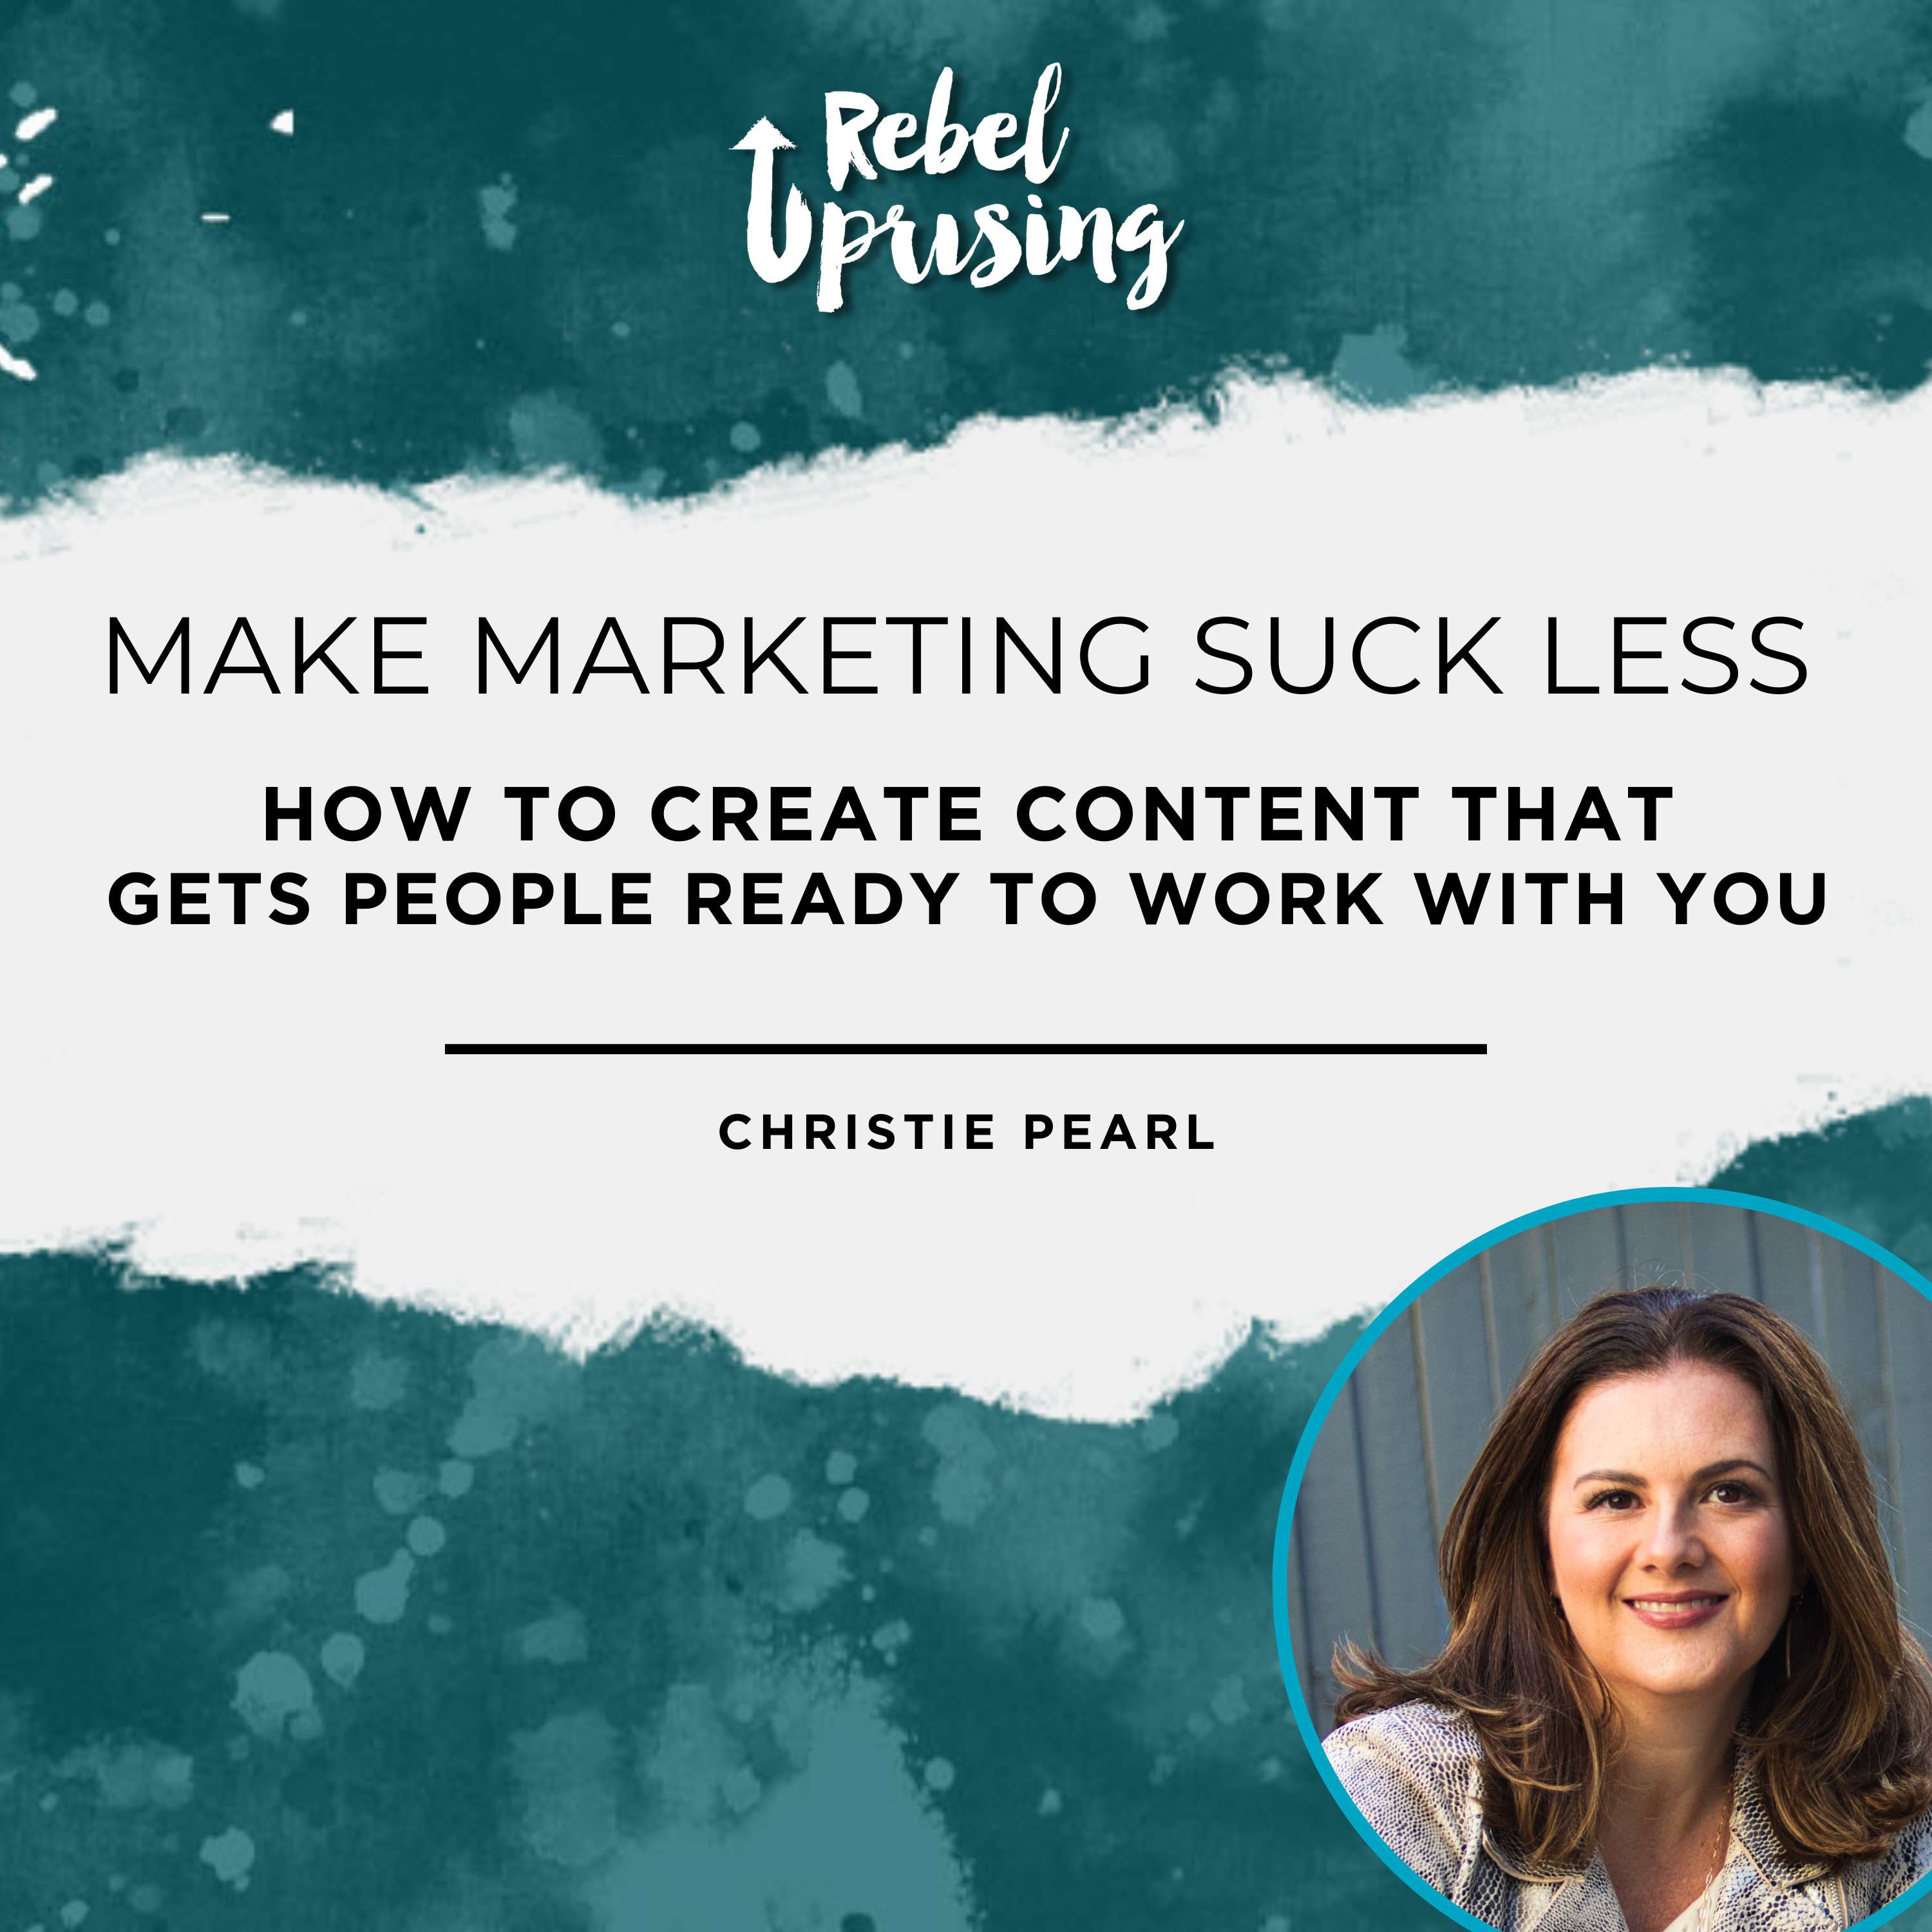 [MMSL] How to Create Content that Gets People Ready to Work with You with Christie Pearl